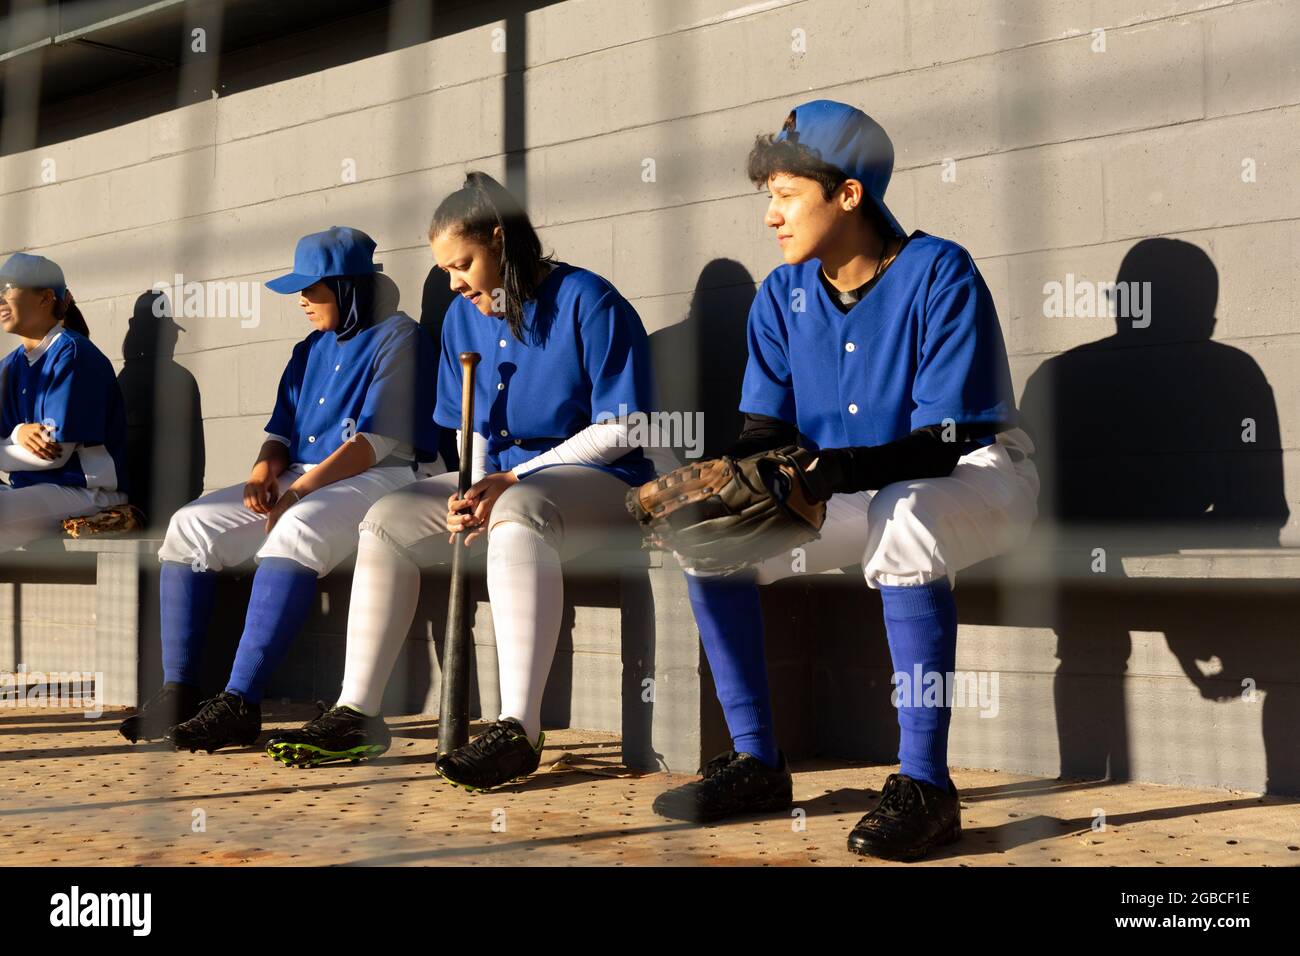 Diverse group of female baseball players sitting on bench in sun, waiting to play Stock Photo